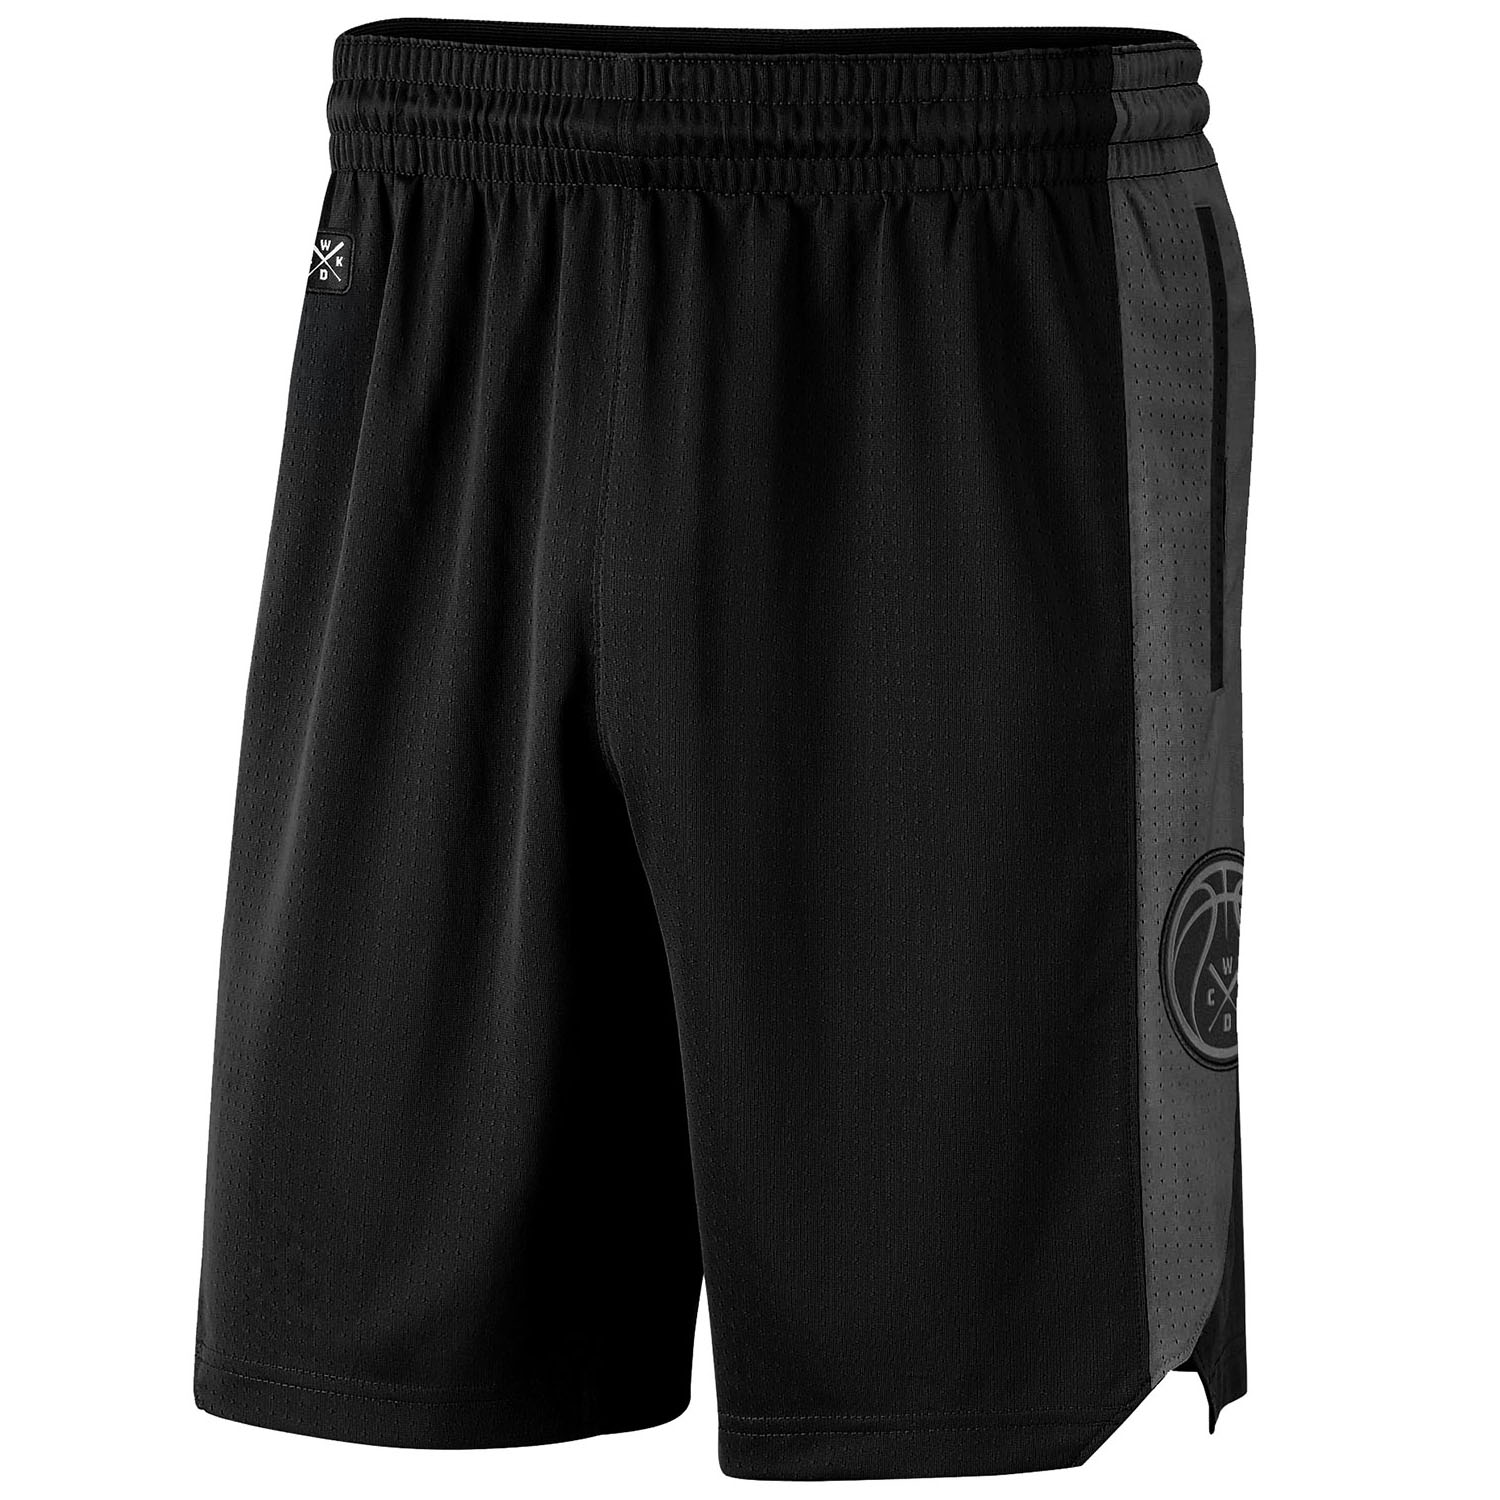 WICKED ONE Fitness Shorts, Playoffs, black